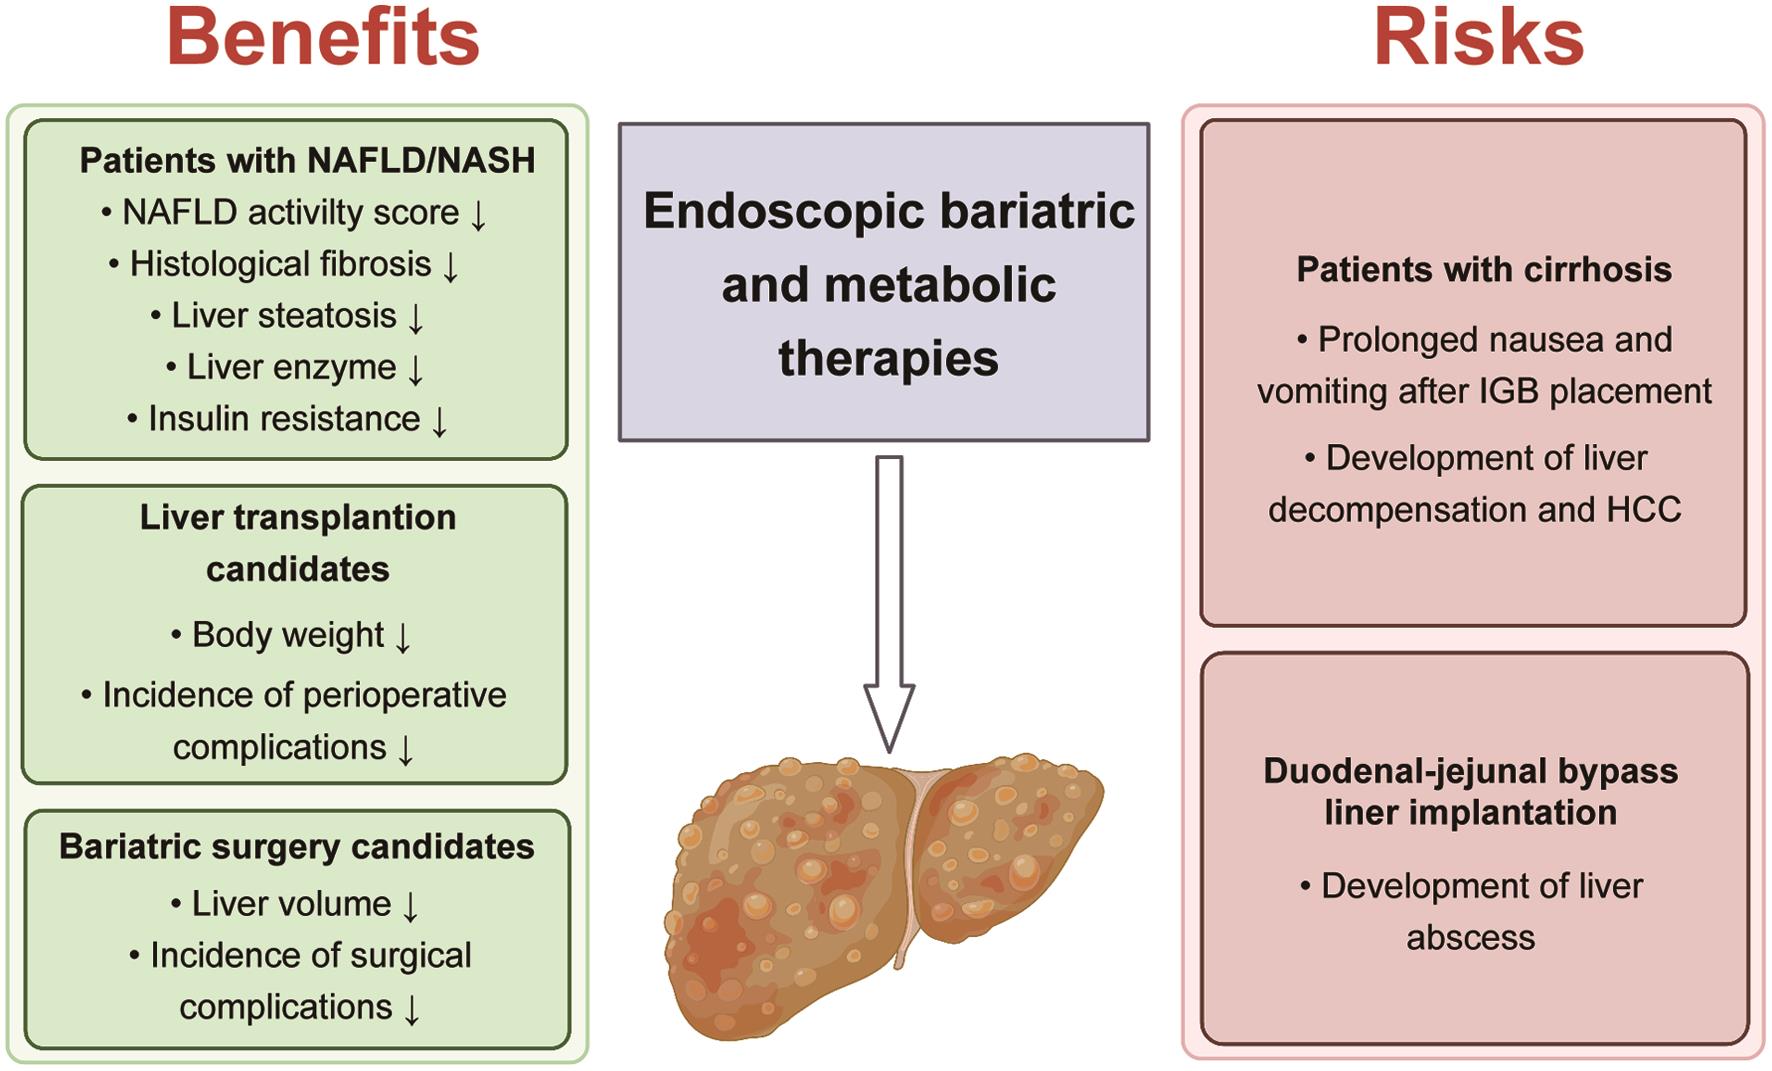 Benefits and associated risks of endoscopic bariatric and metabolic therapies for liver disease.